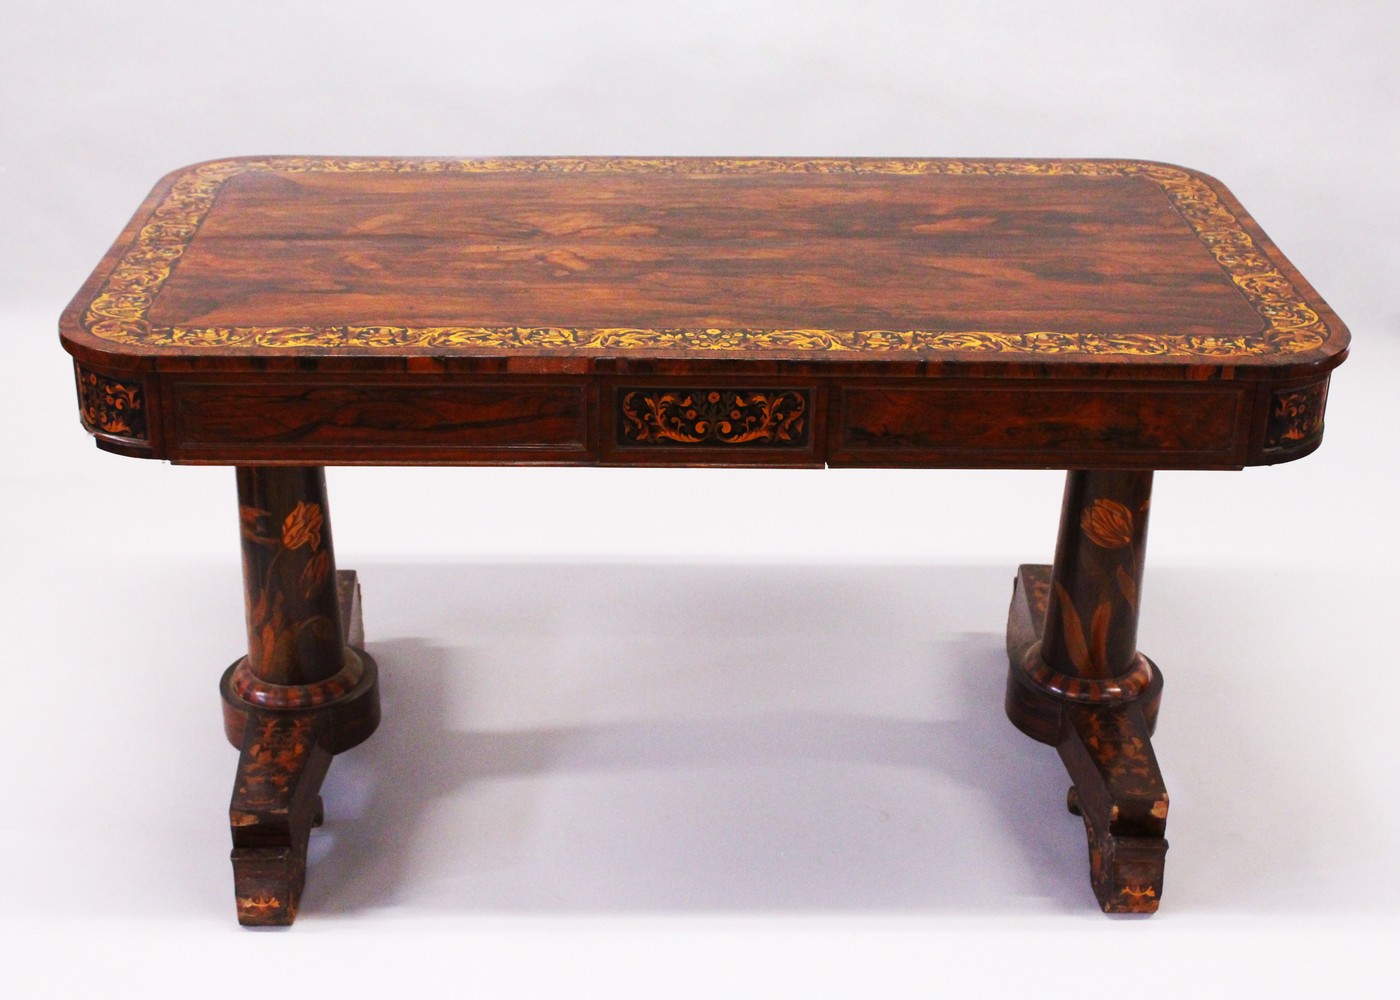 AN EARLY 19TH CENTURY ROSEWOOD AND MARQUETRY LIBRARY TABLE, in the manner of Gillow, the rounded